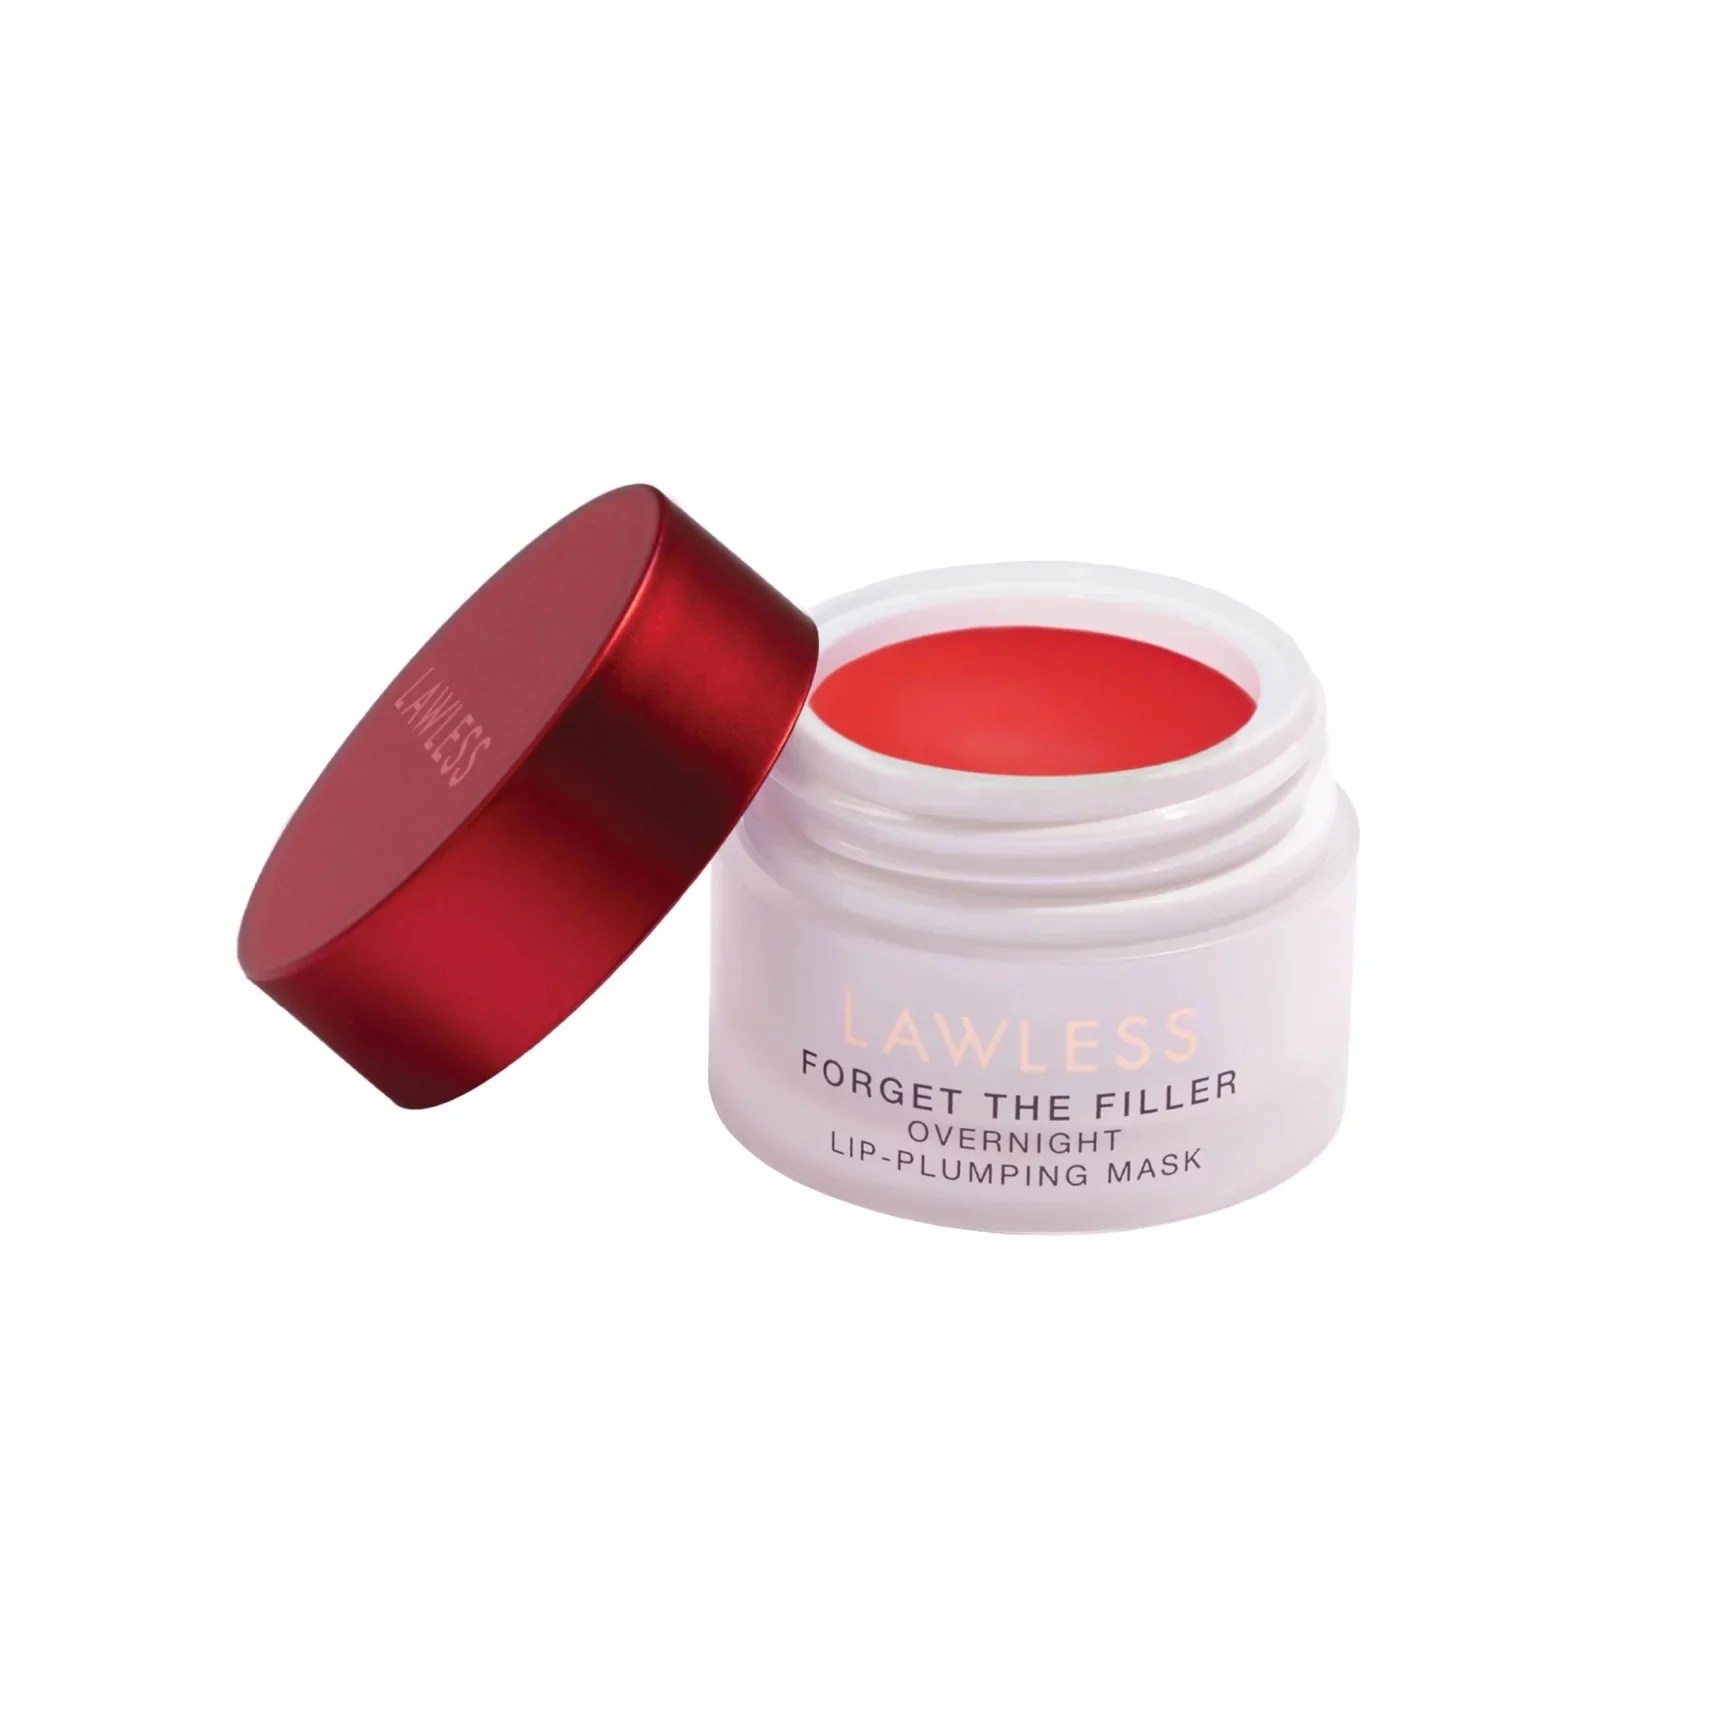 A white jar of a red lip mask.